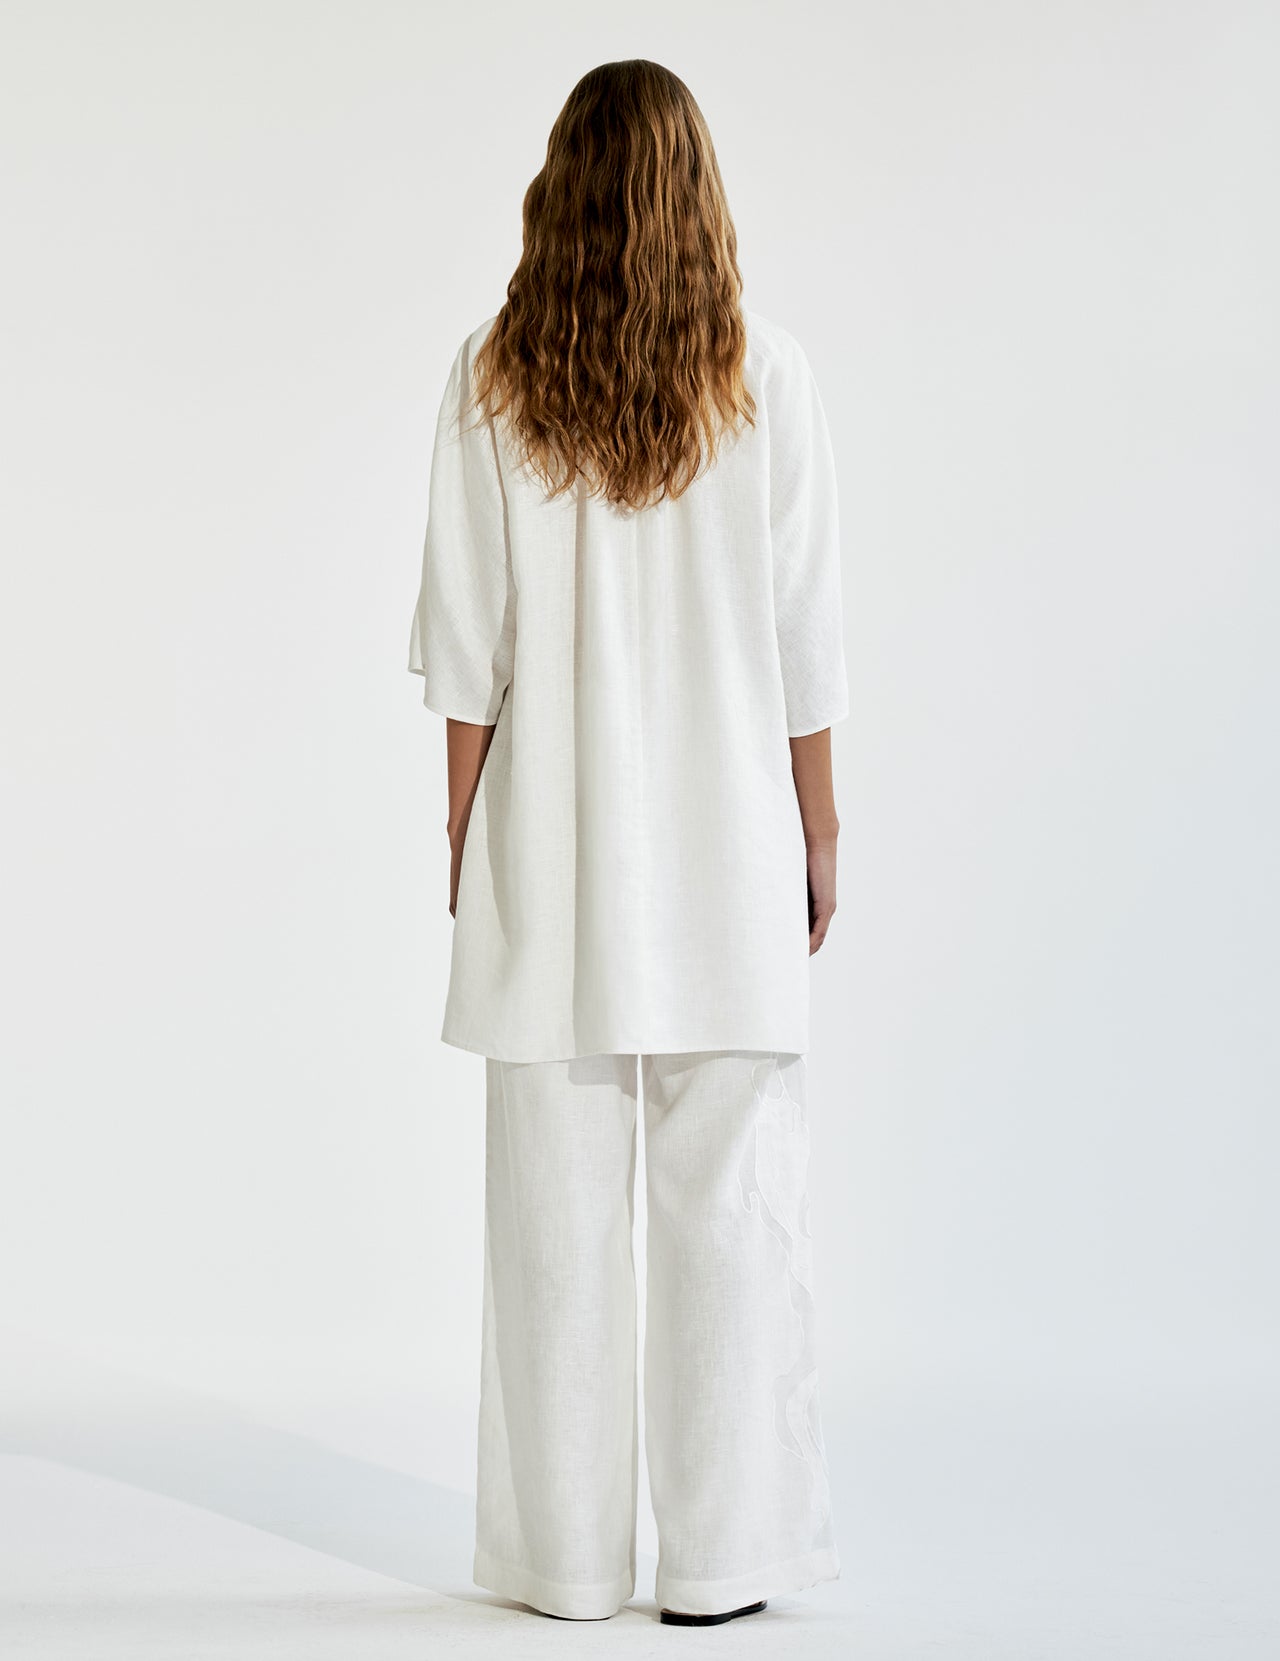  White Linen Drawstring Wide Leg Trousers with Cutwork Appliqué  